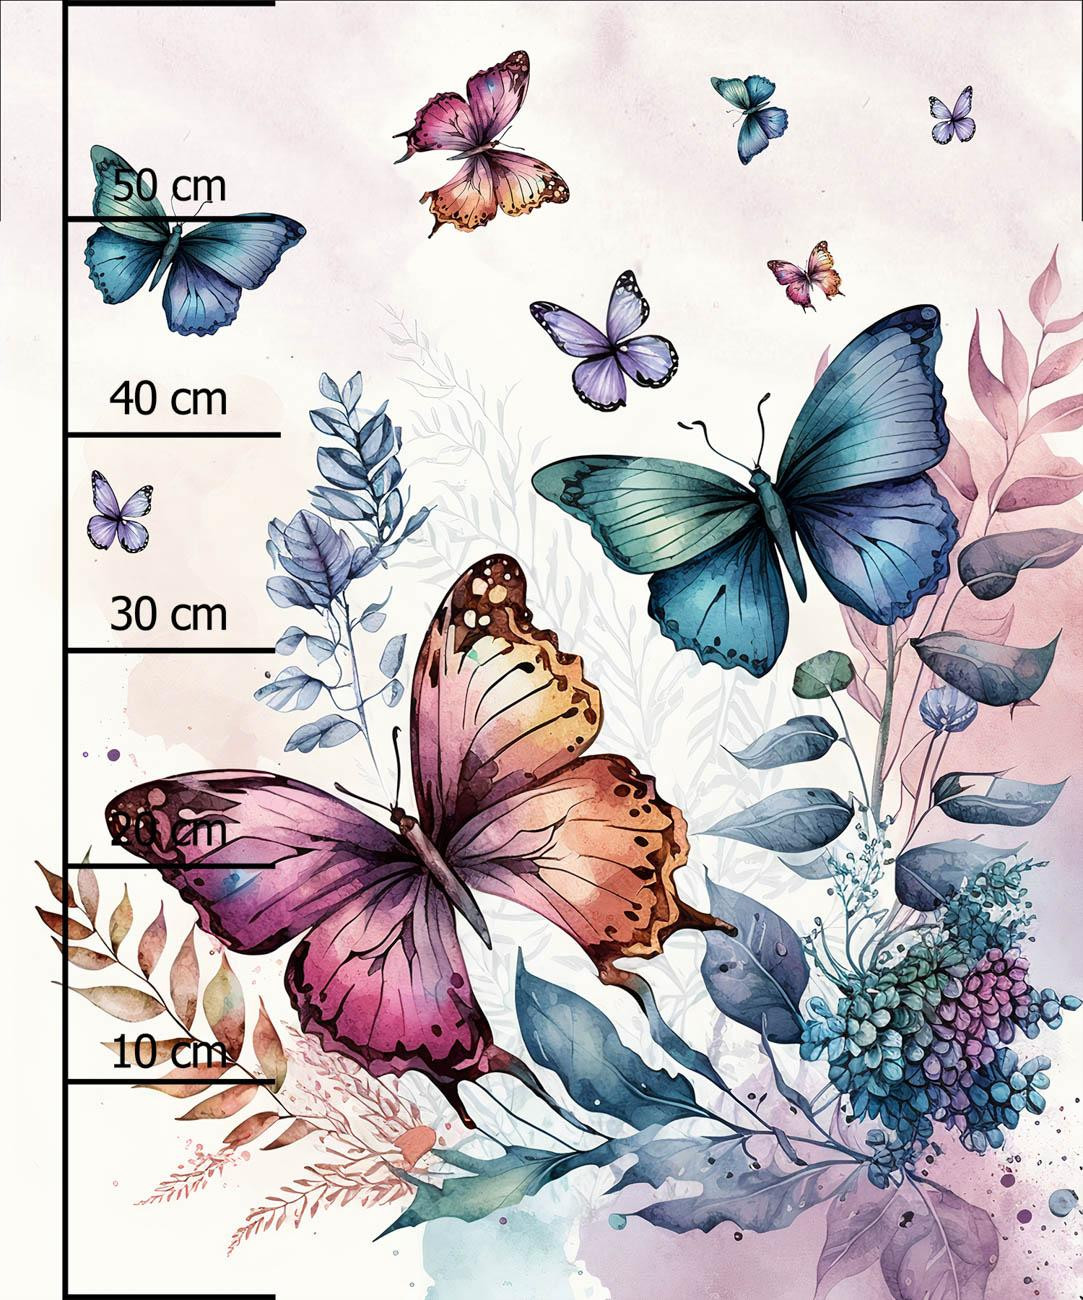 BEAUTIFUL BUTTERFLY MS. 4 - Panel, Softshell (60cm x 50cm)